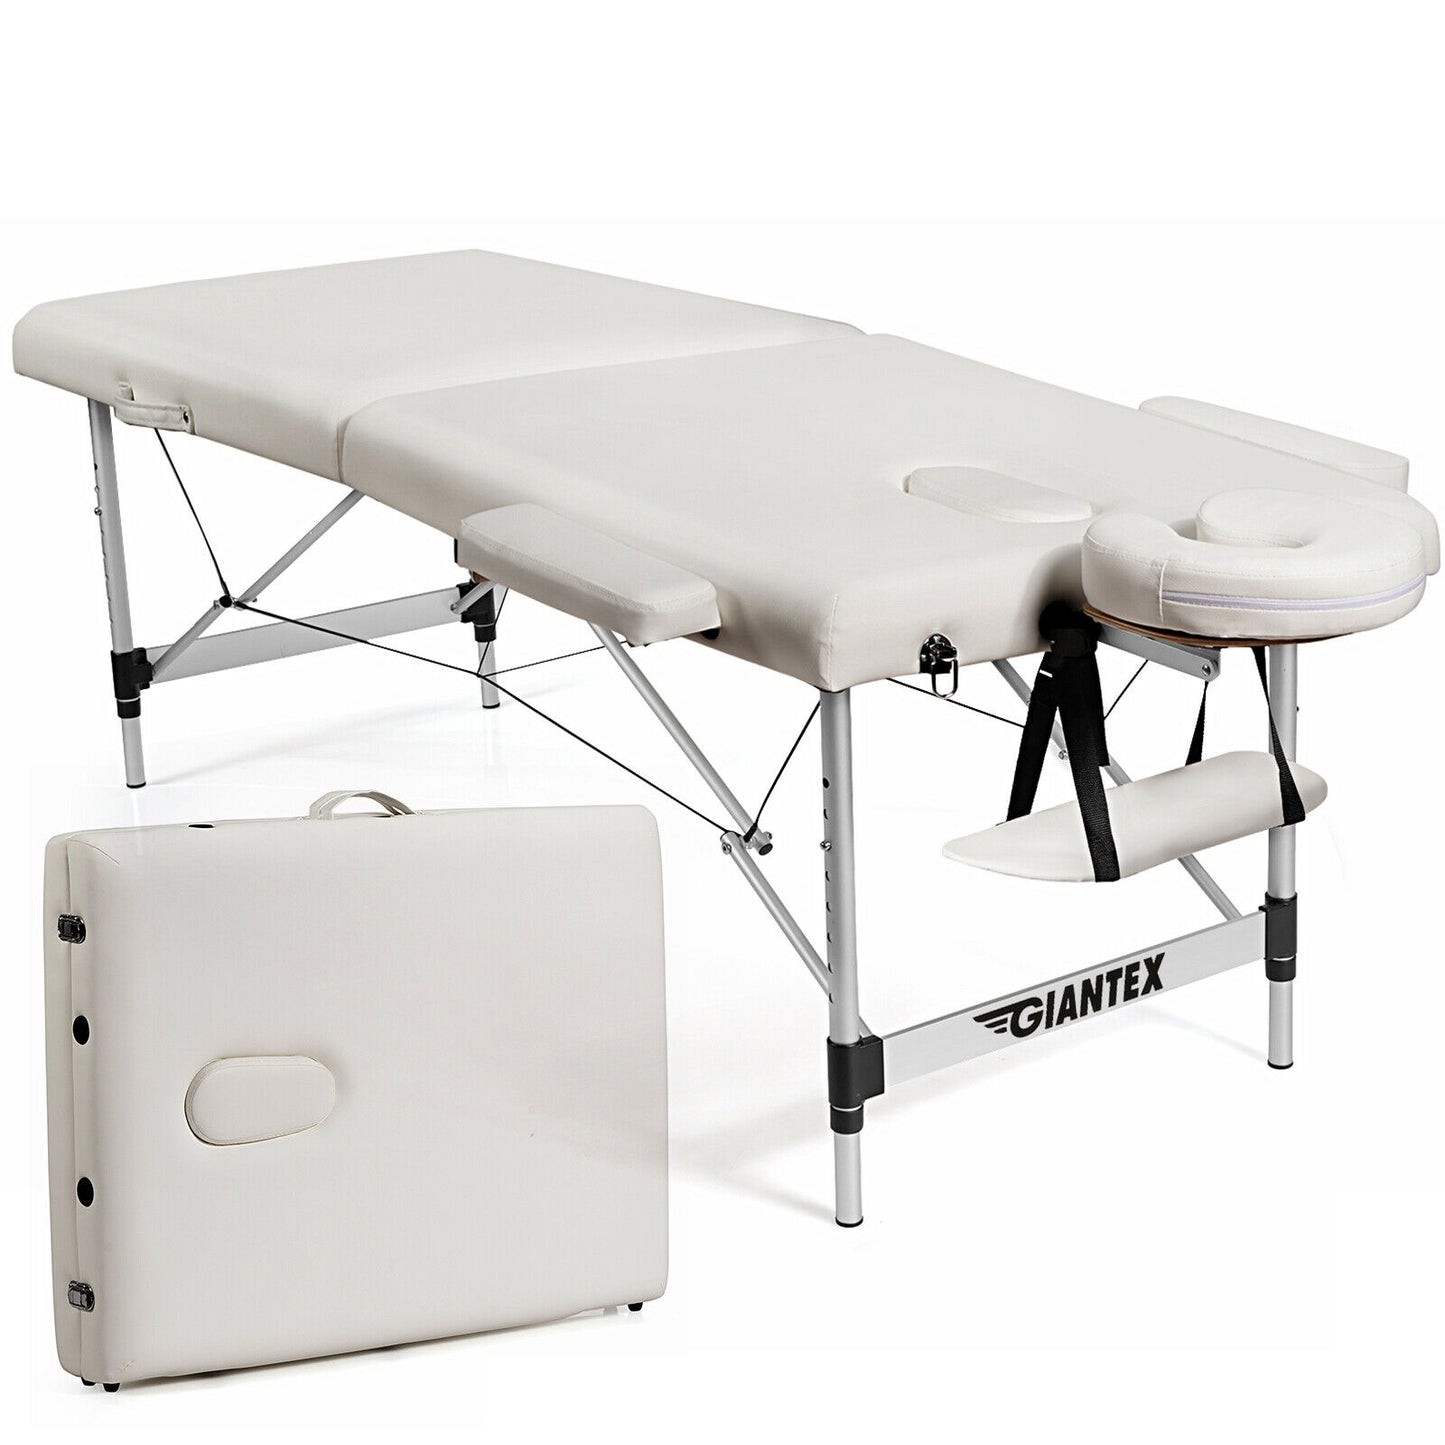 84 Inch L Portable Adjustable Massage Bed with Carry Case for Facial Salon Spa-White